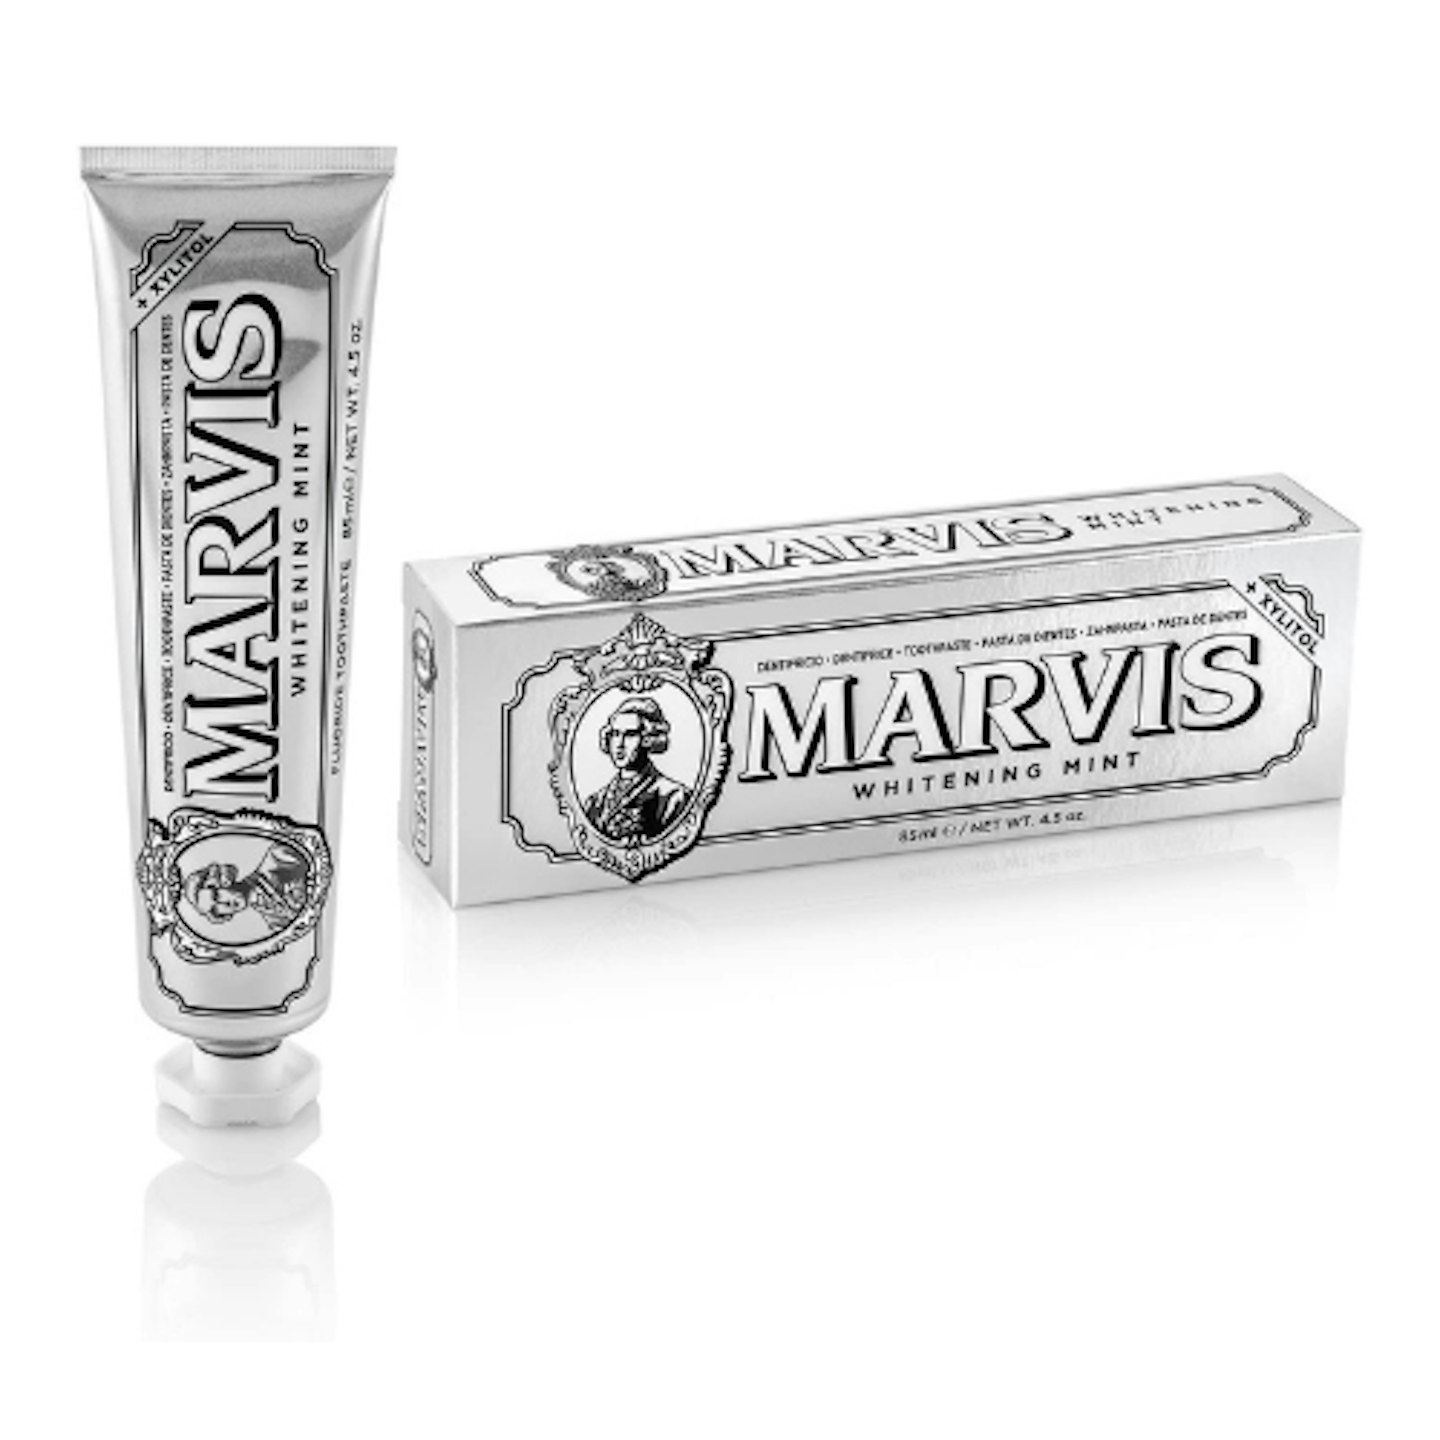 Marvis toothpaste on a white background